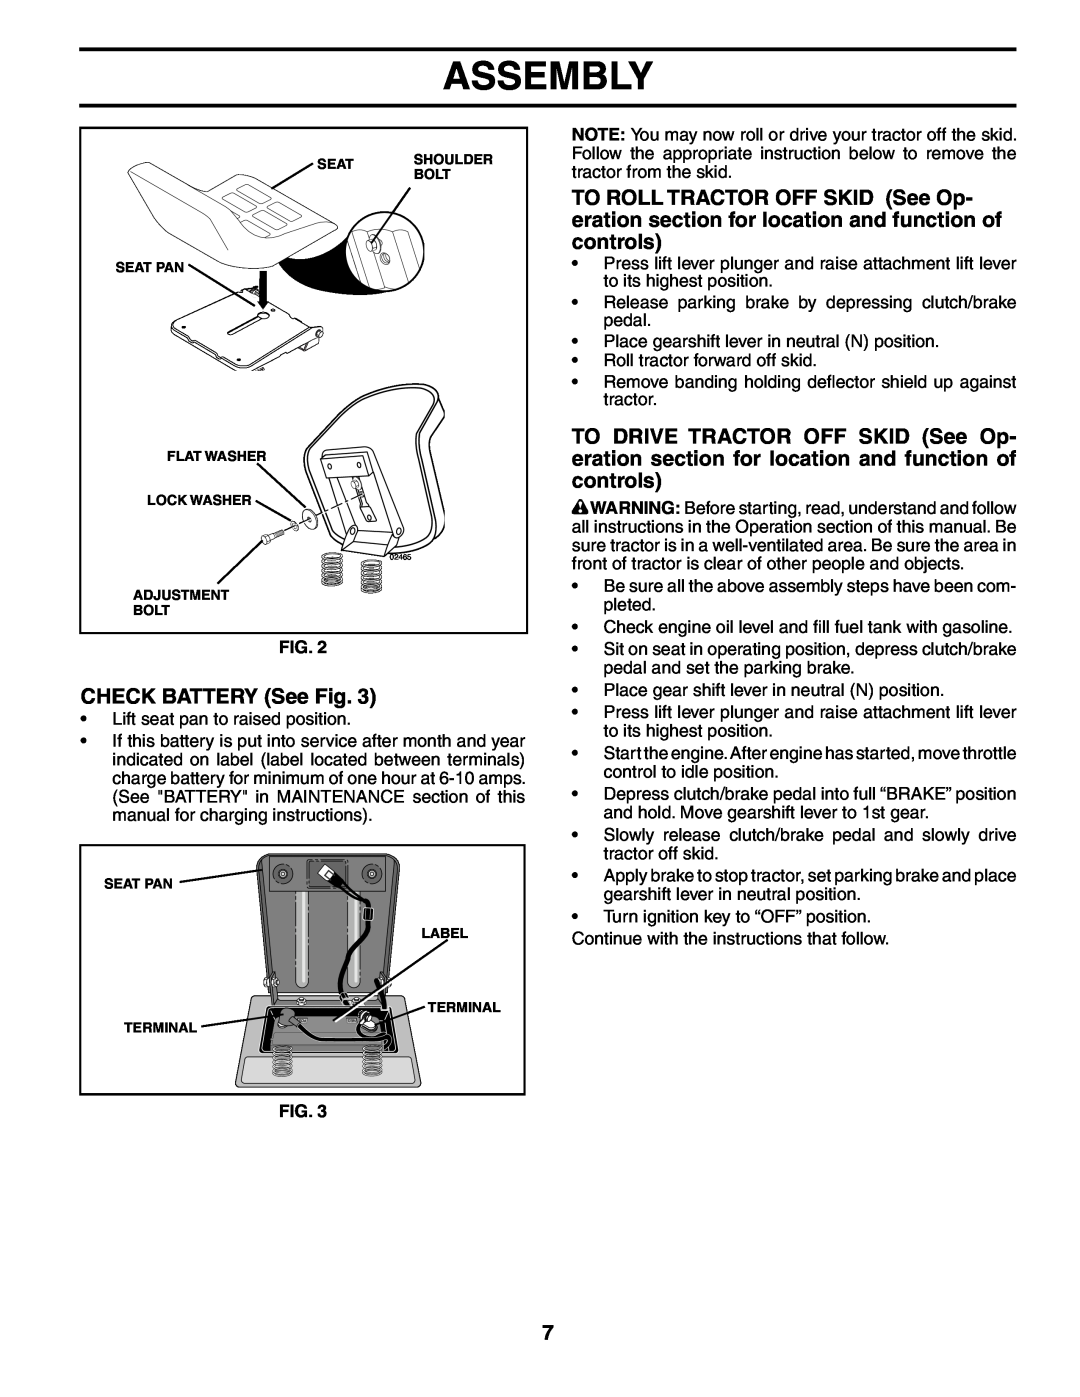 Weed Eater 195383 manual CHECK BATTERY See Fig, Assembly 